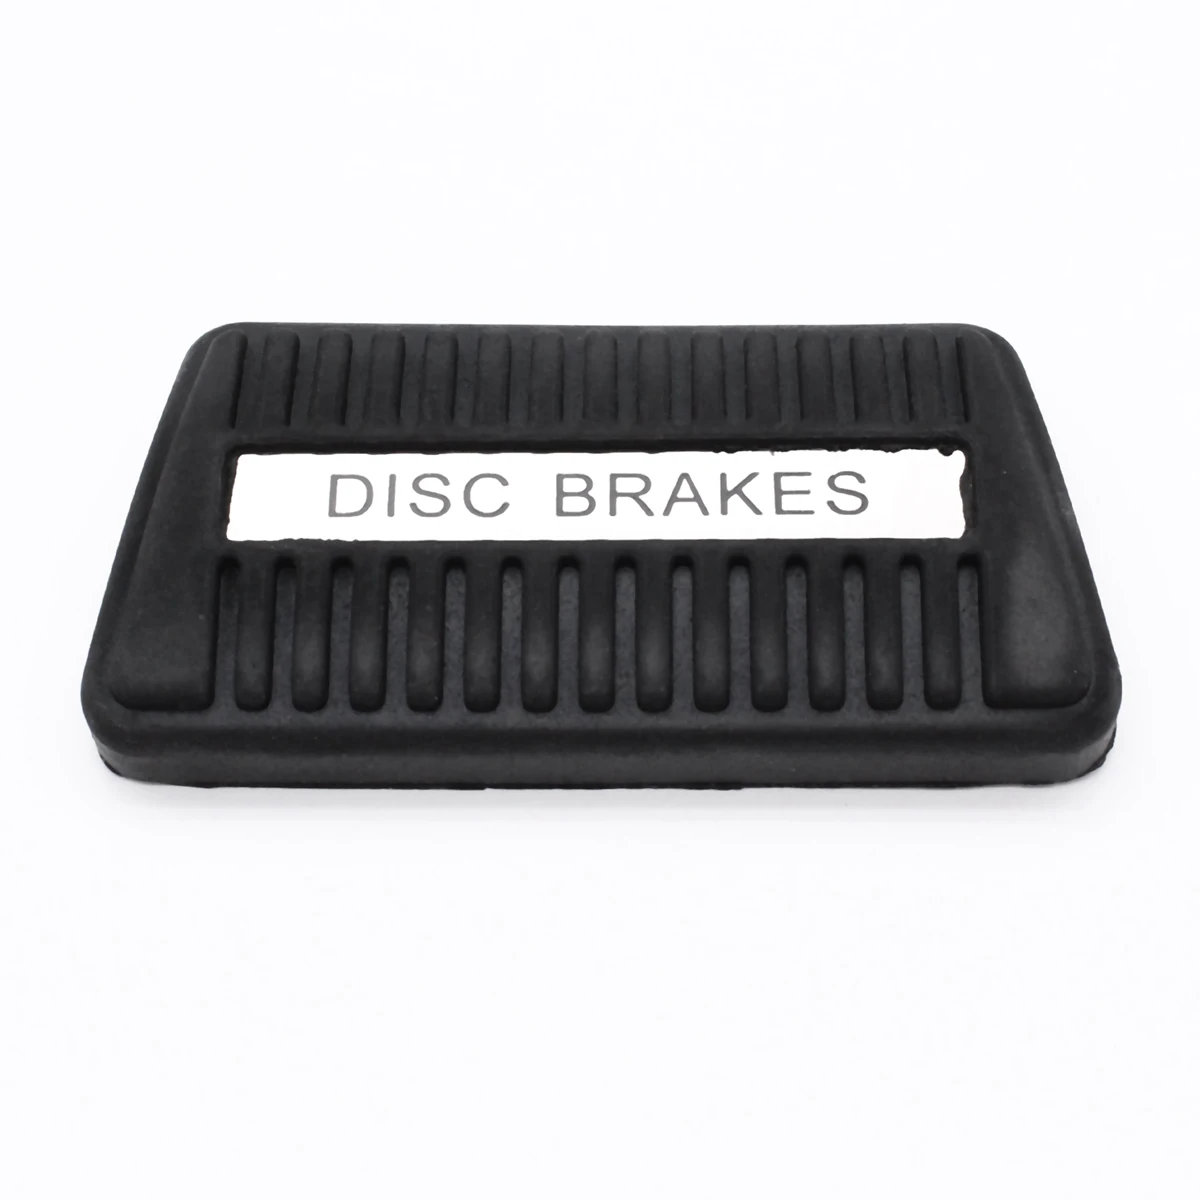 

Car Rubber Brake Pedal Cover Foot Rest Pads Pad for Holden HQ HK HT HG HJ HX HZ Sedan Coupe GtD Wagon Replacing Pedals